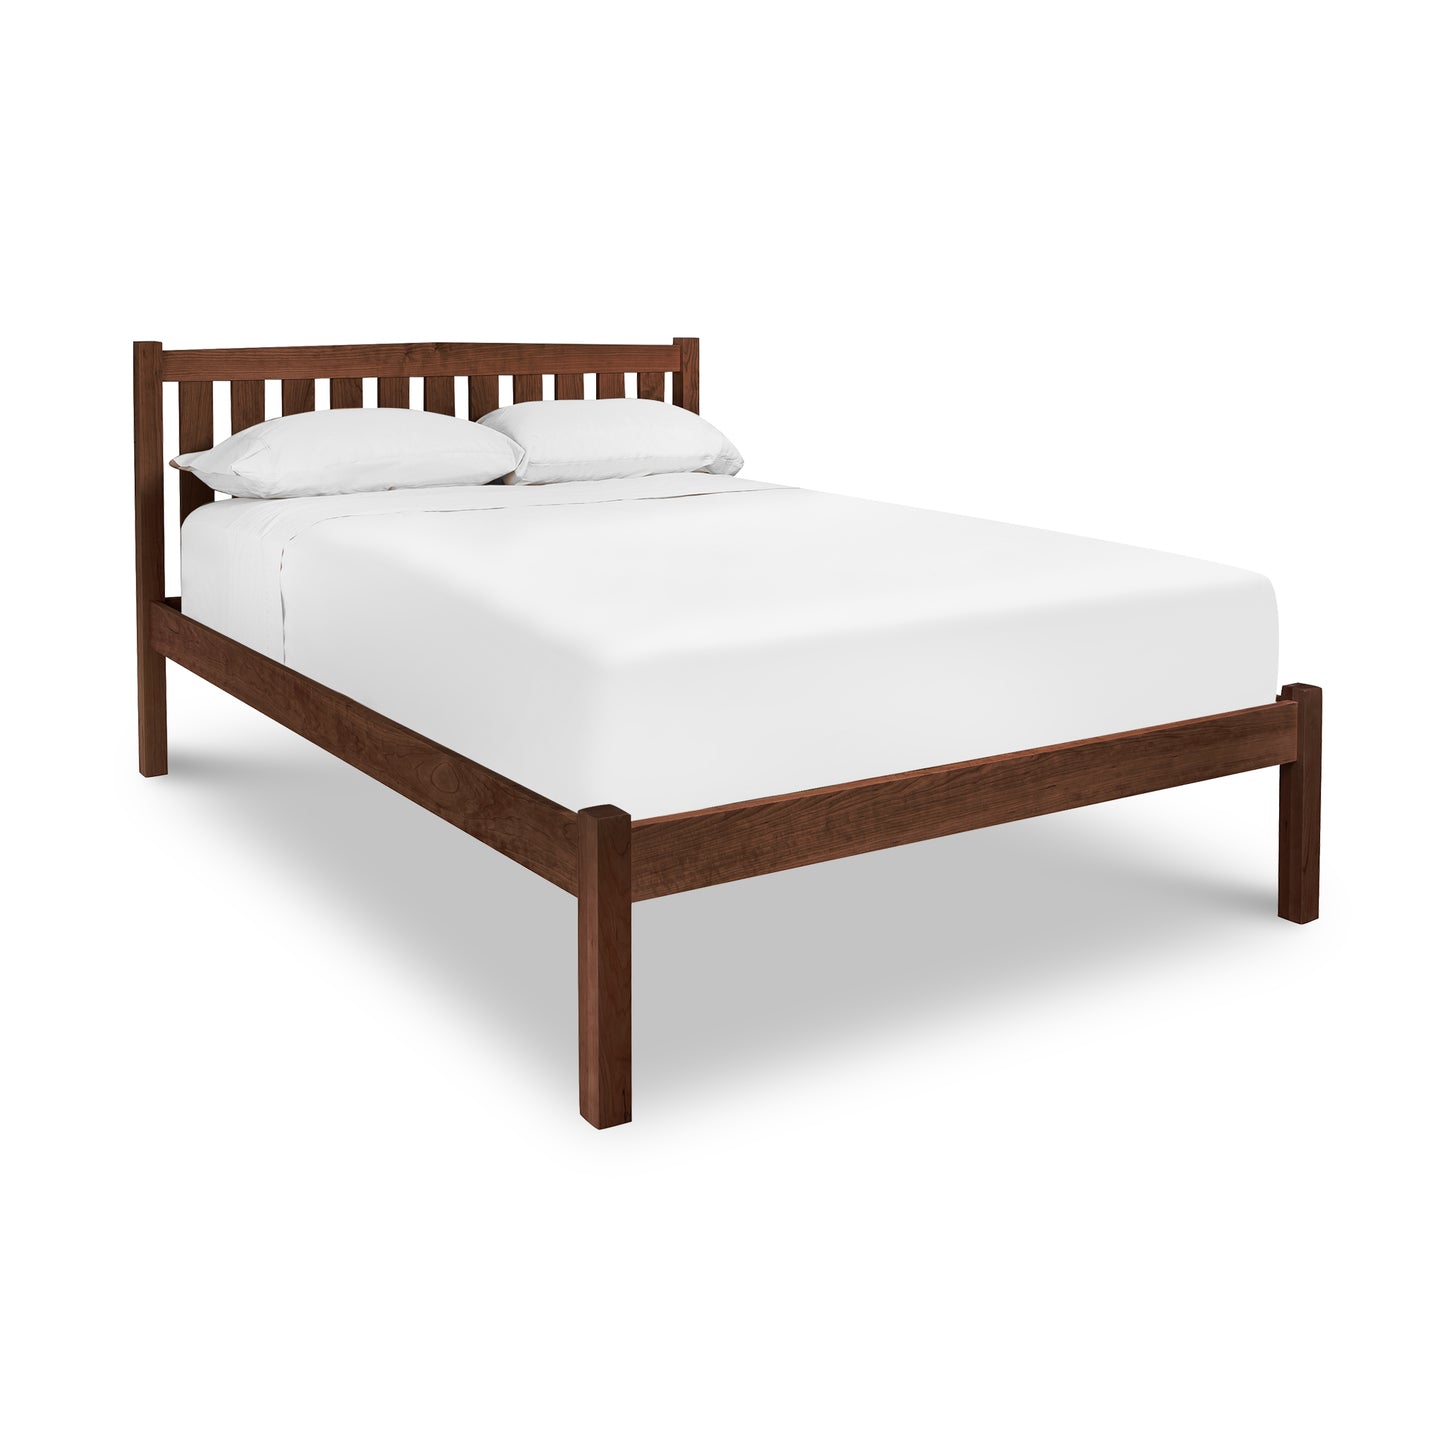 A Vermont Furniture Designs Bennington Bed with Low Footboard platform bed frame with a white mattress and pillows isolated on a white background.